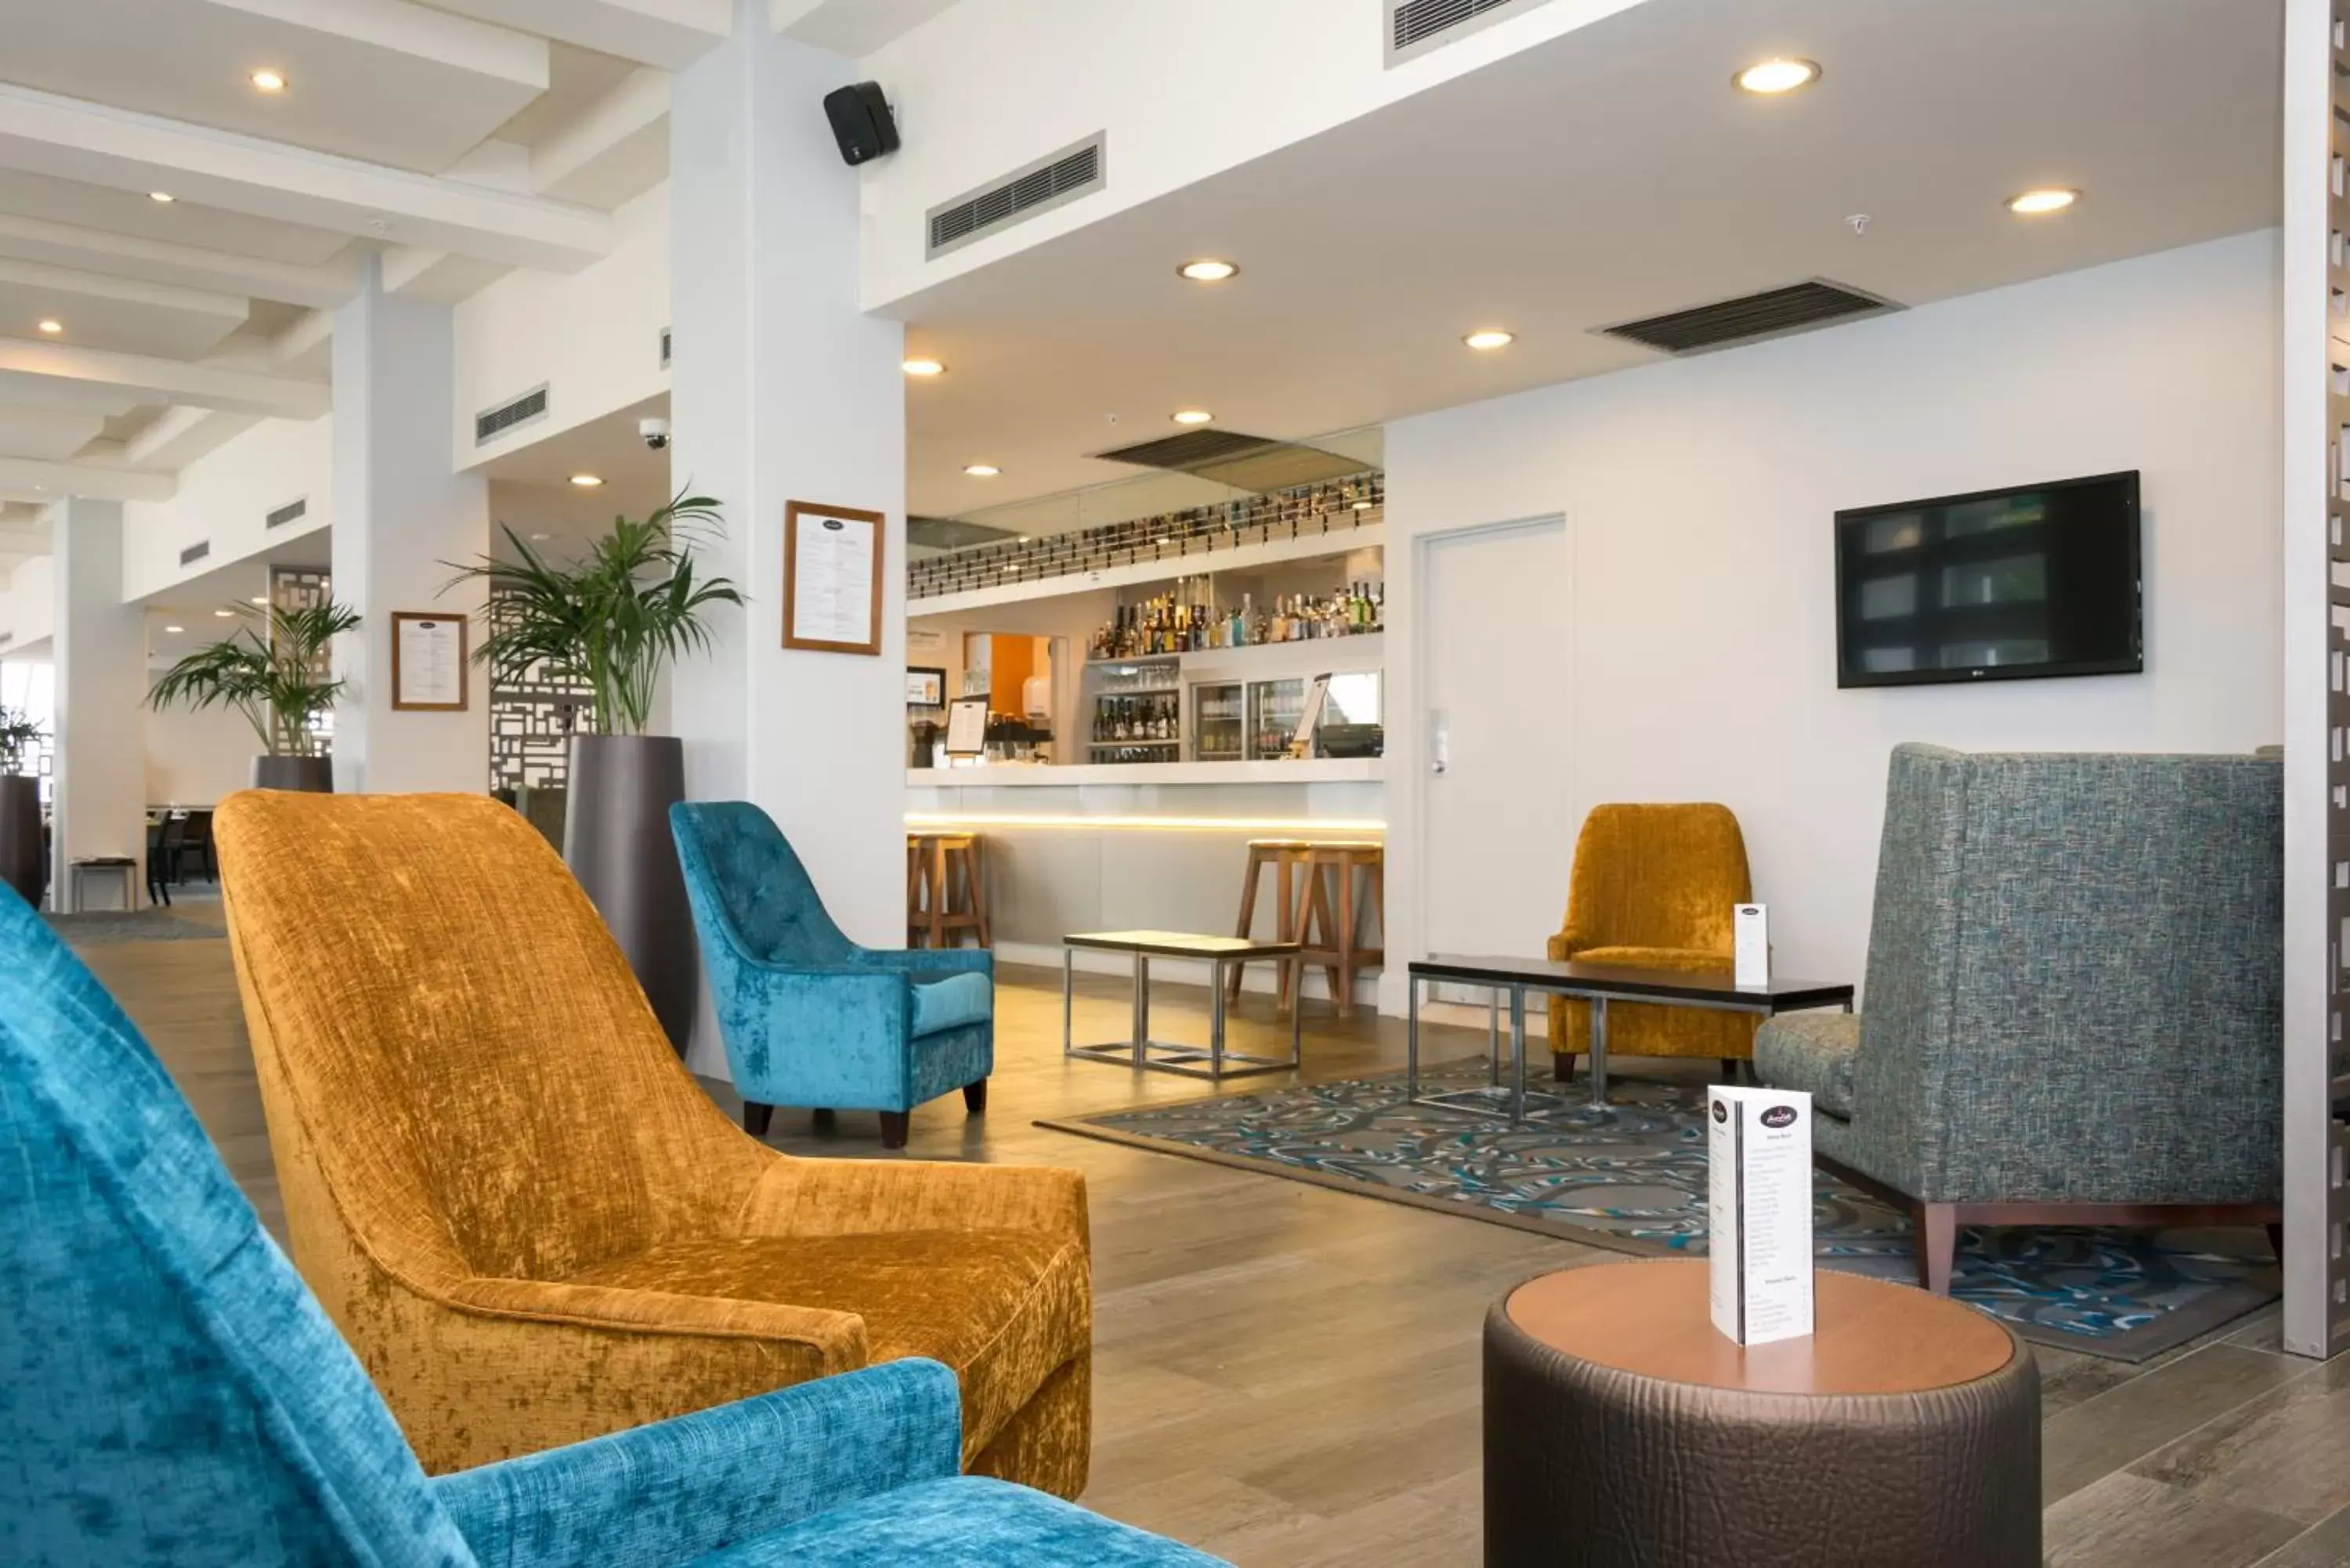 Lounge or bar, Lobby/Reception in Copthorne Hotel Palmerston North